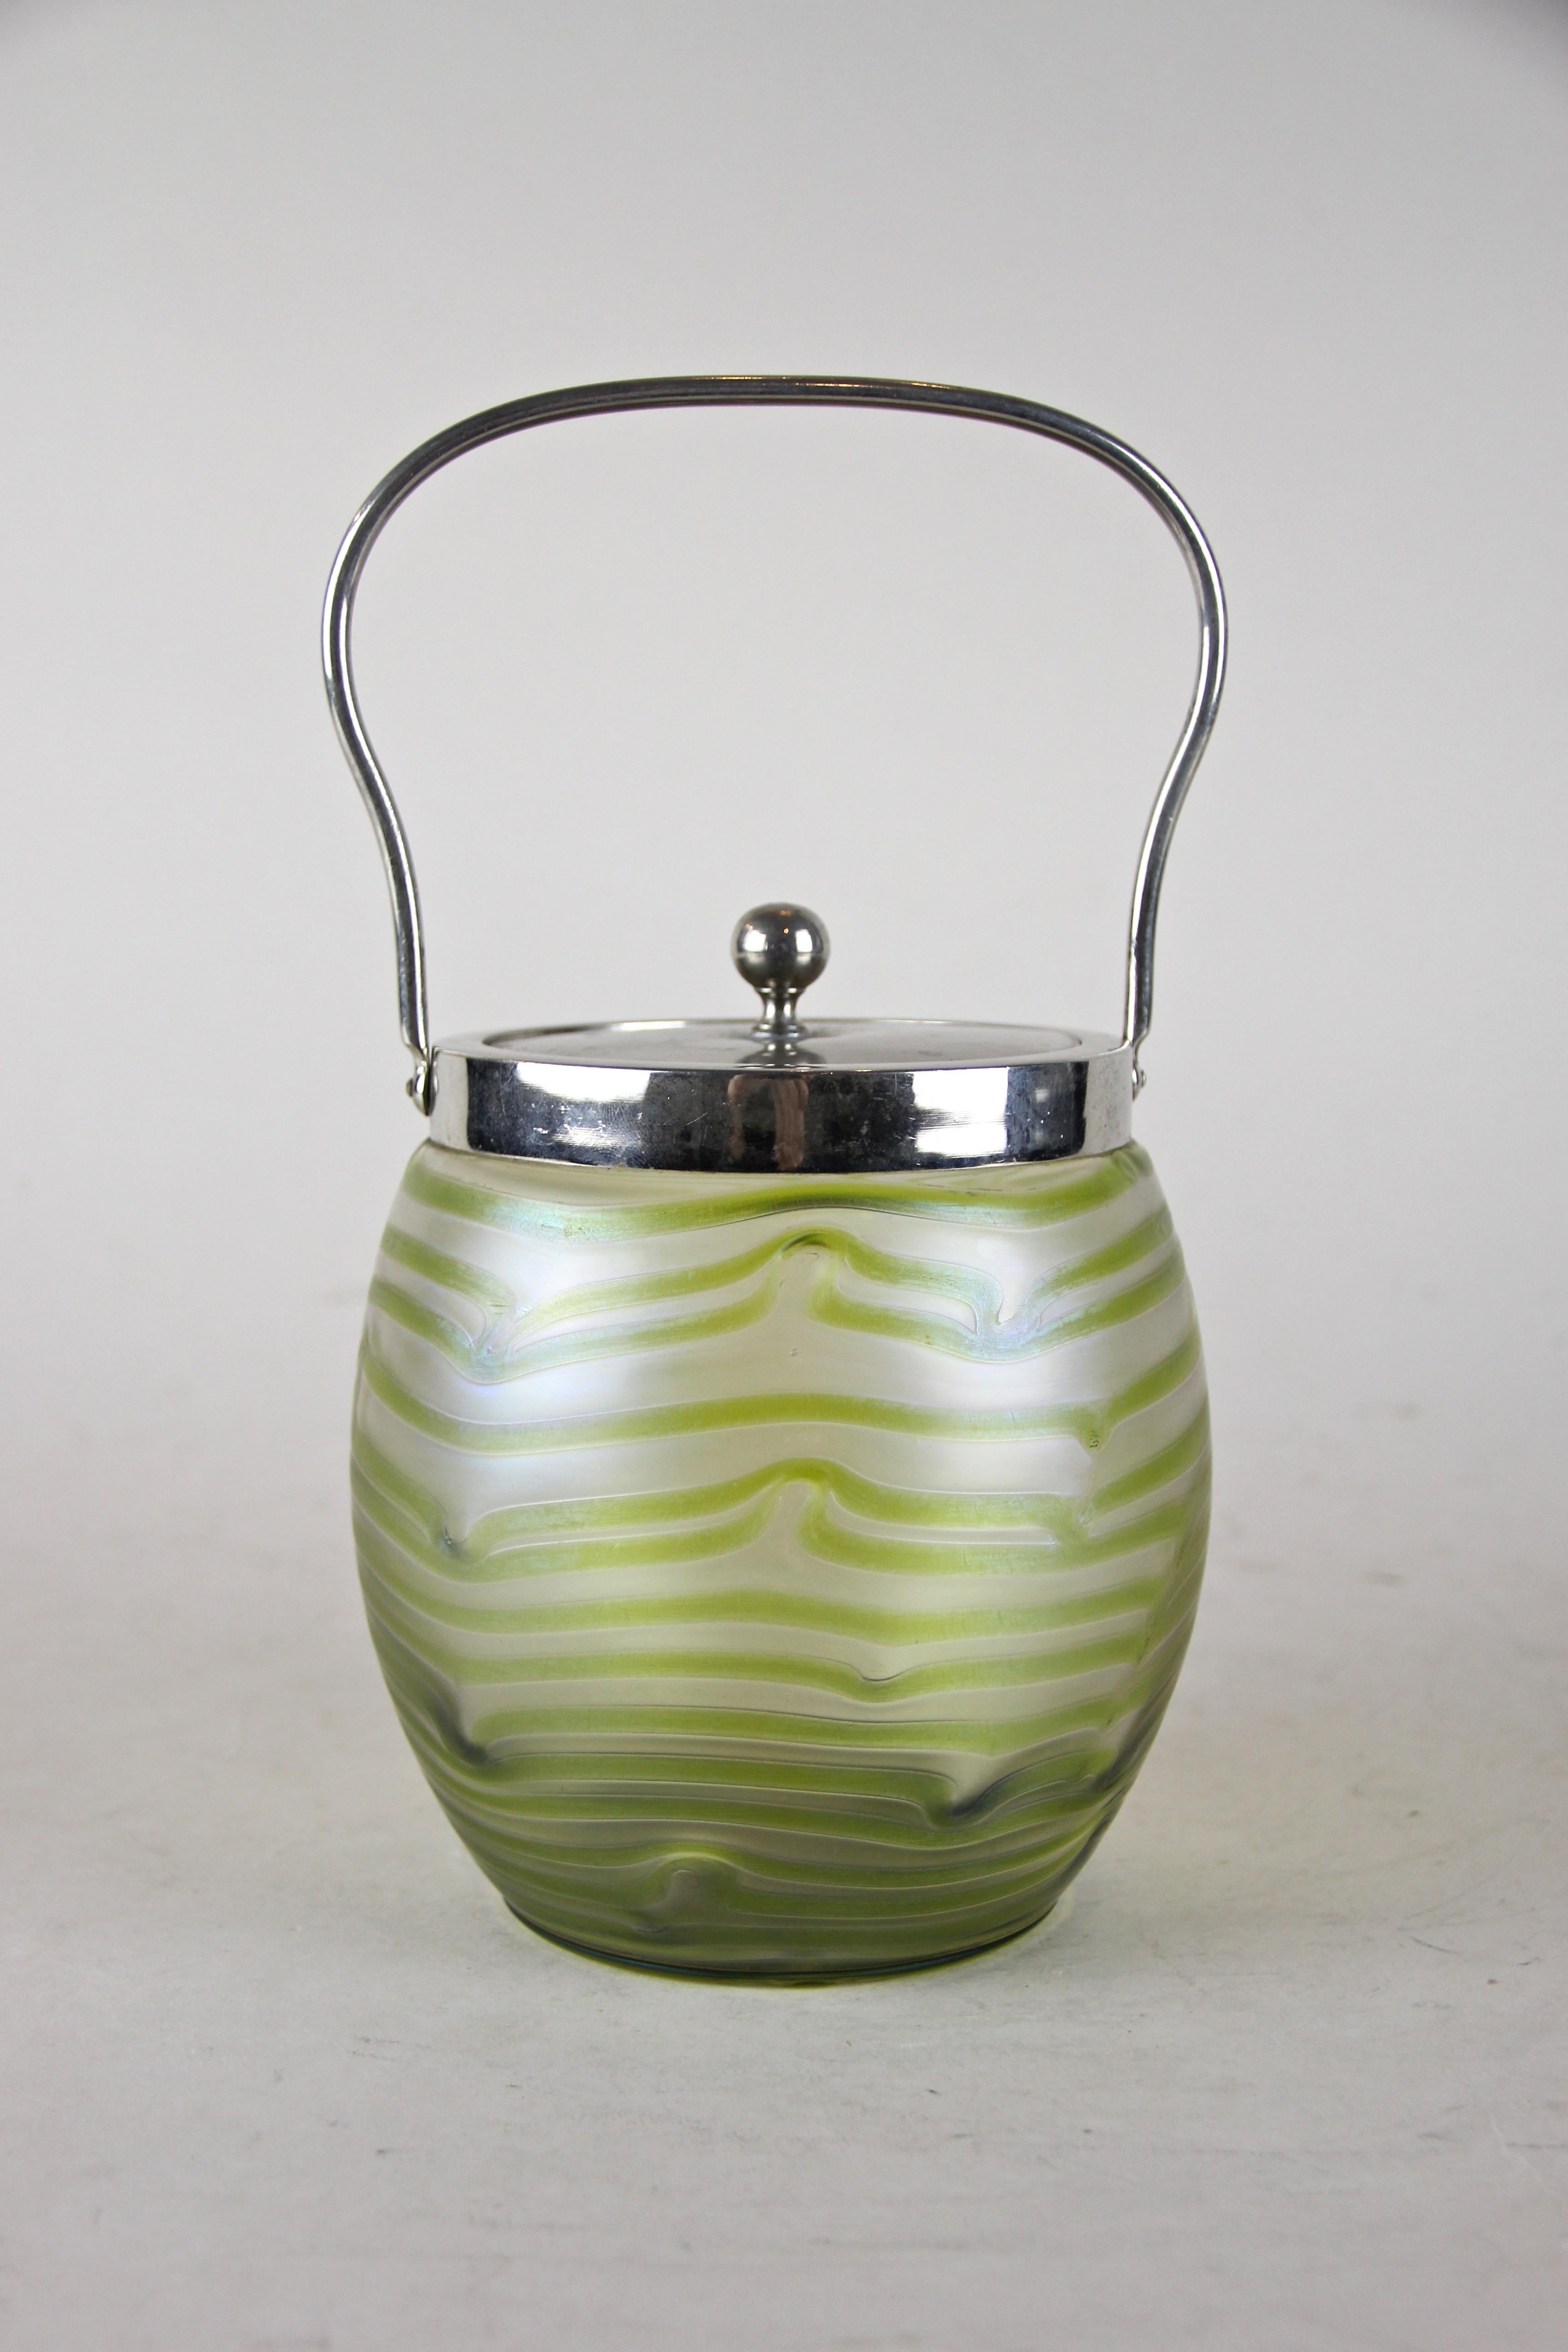 Decorative glass jar by Palme König with lid from the early 20th century out of Bohemia. The gorgeous iridescent glass body shimmers in different colors by showing beautiful green lines. A chromed mounting with slim handle fits perfect to the artful